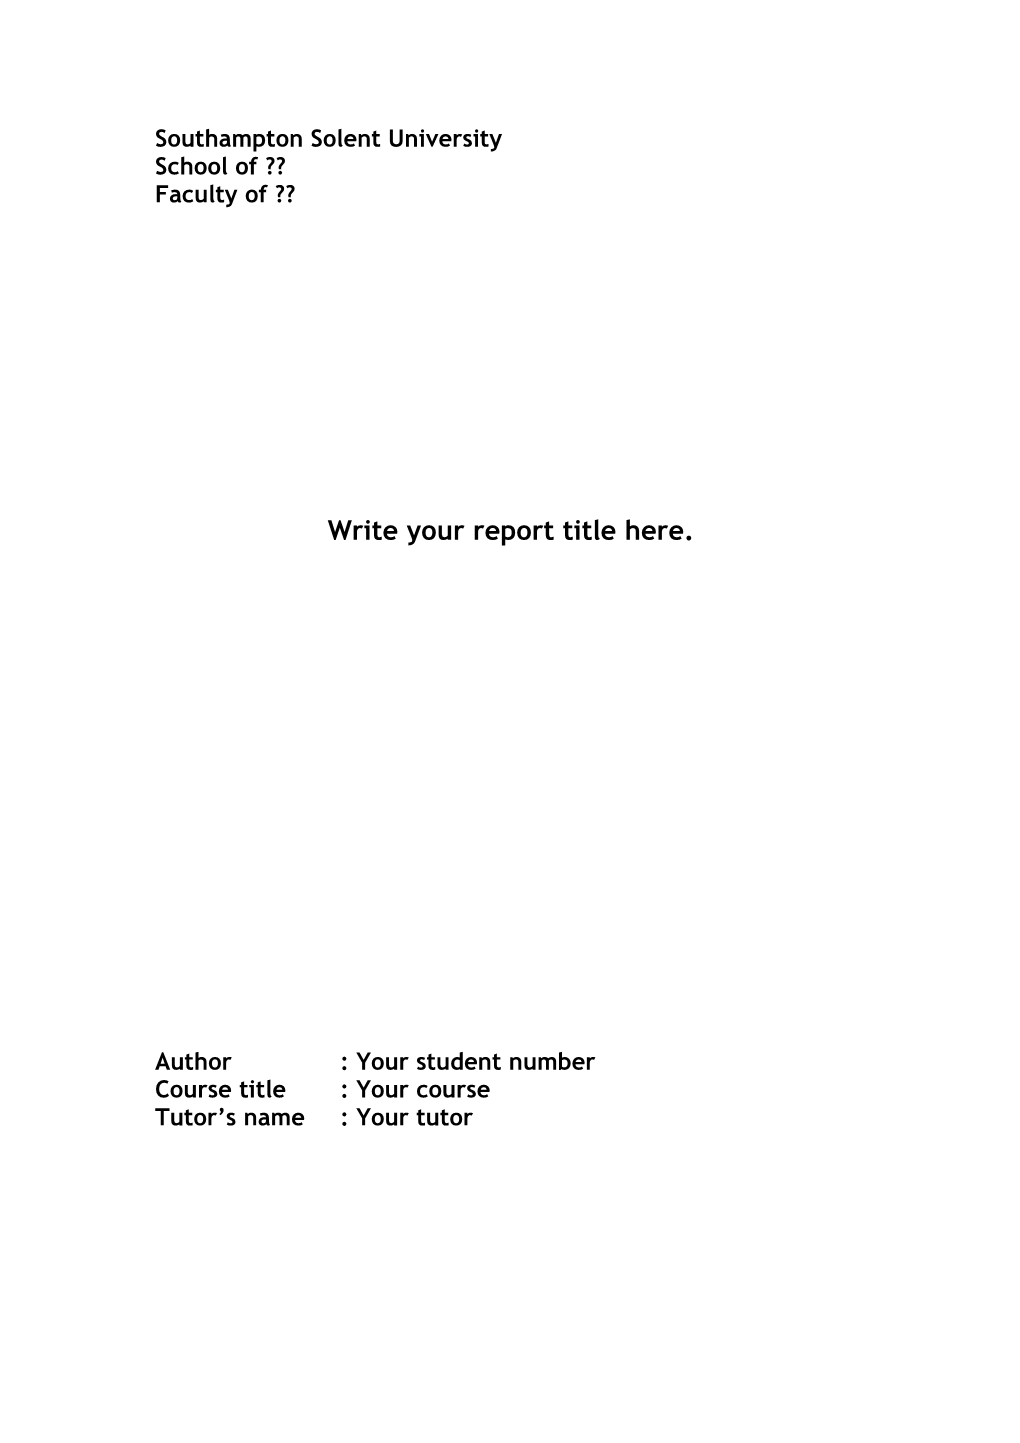 Write Your Report Title Here